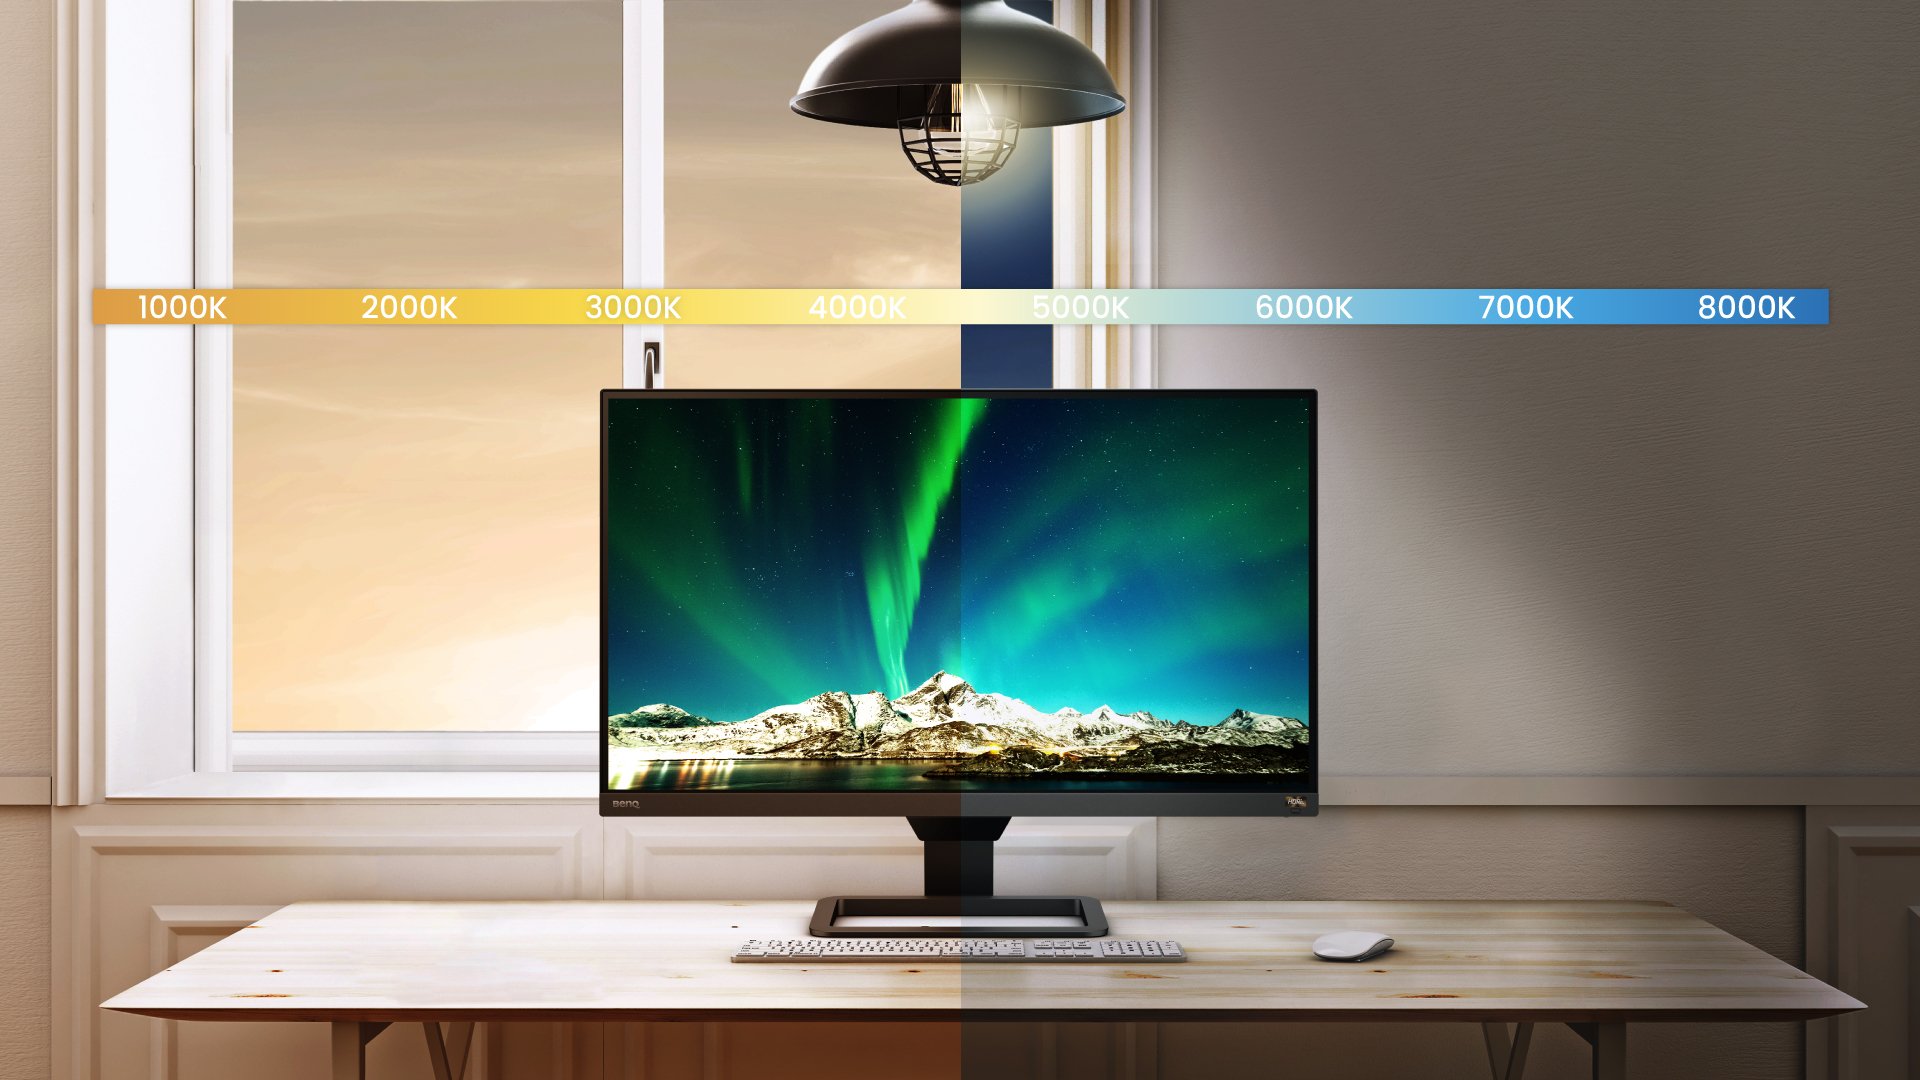 brightness intelligence plus adjusts display brightness and color temperature for your most comfortable viewing experience